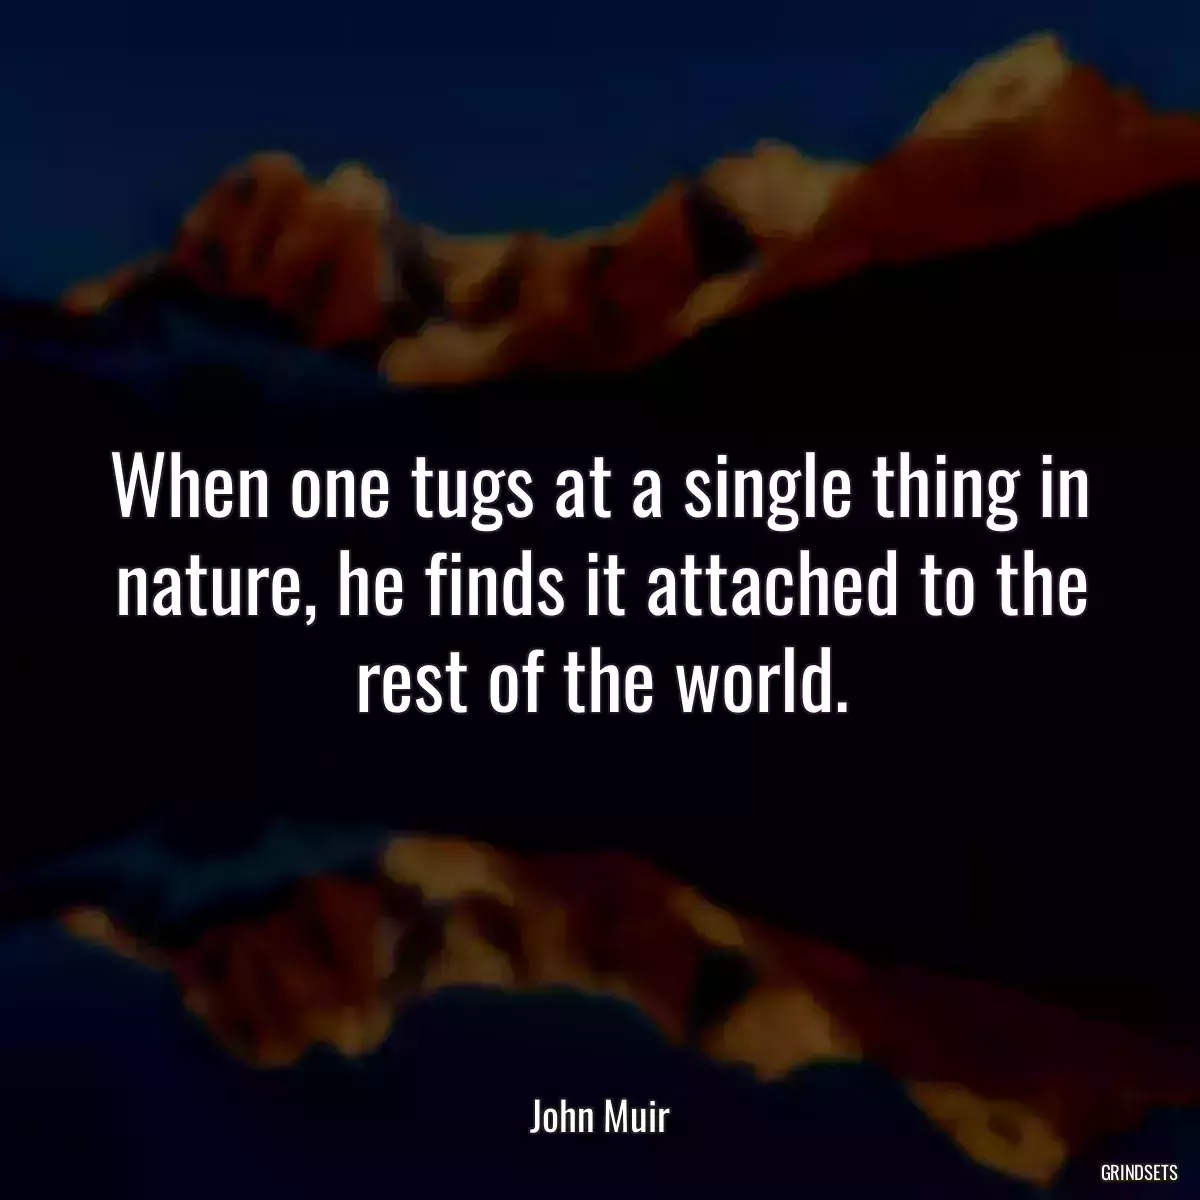 When one tugs at a single thing in nature, he finds it attached to the rest of the world.